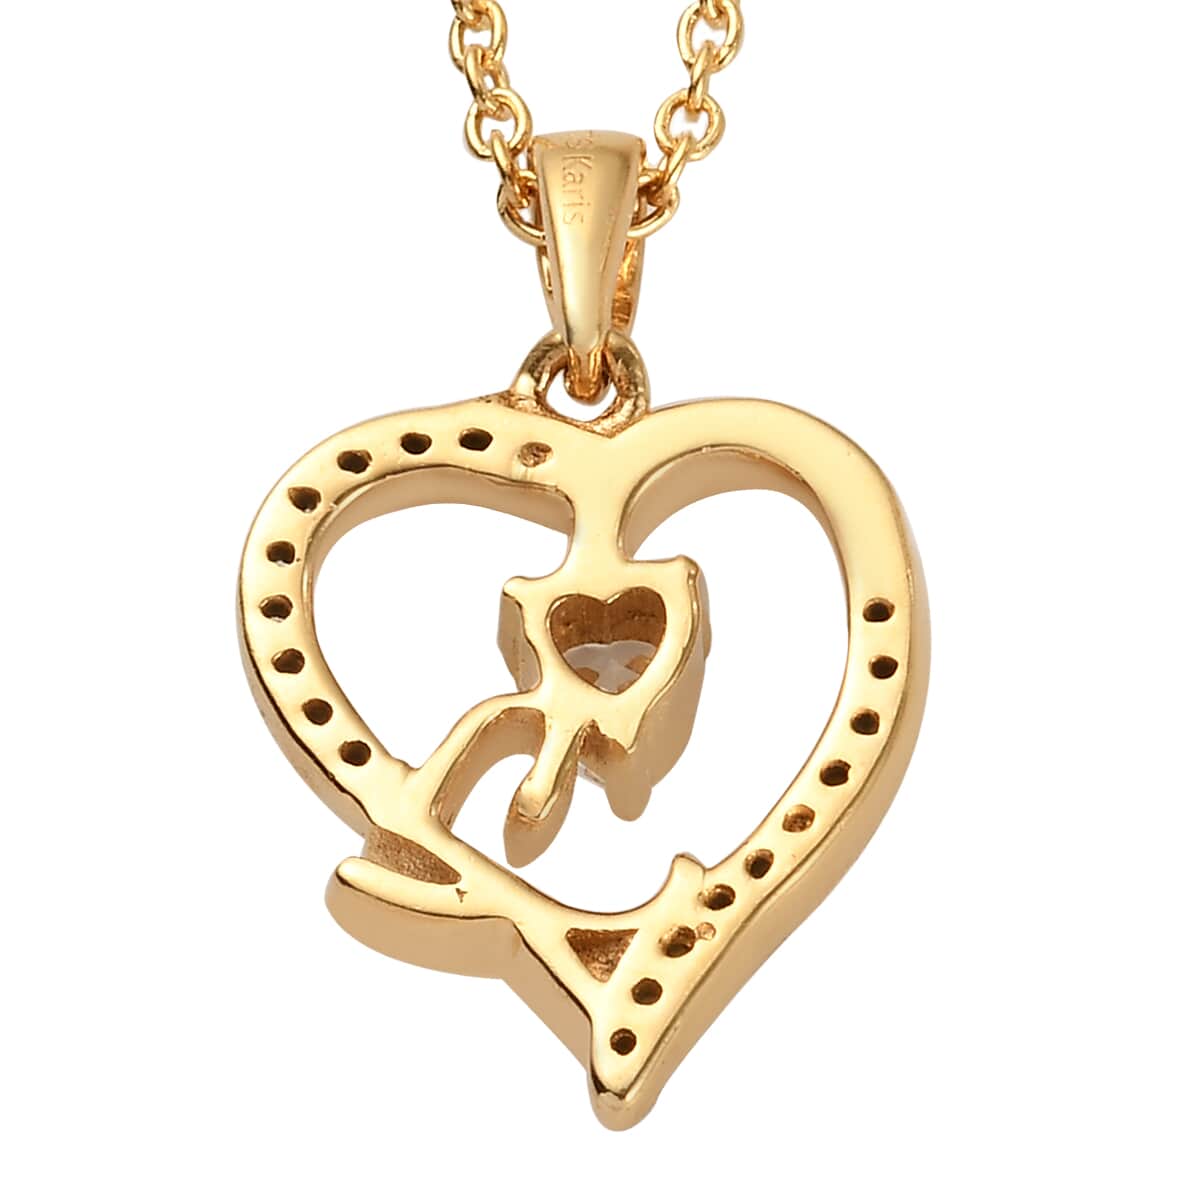 KARIS Simulated Diamond Initial K Heart Pendant Necklace 20 Inches in 18K YG Plated and ION Plated Yellow Gold Stainless Steel 0.80 ctw image number 4